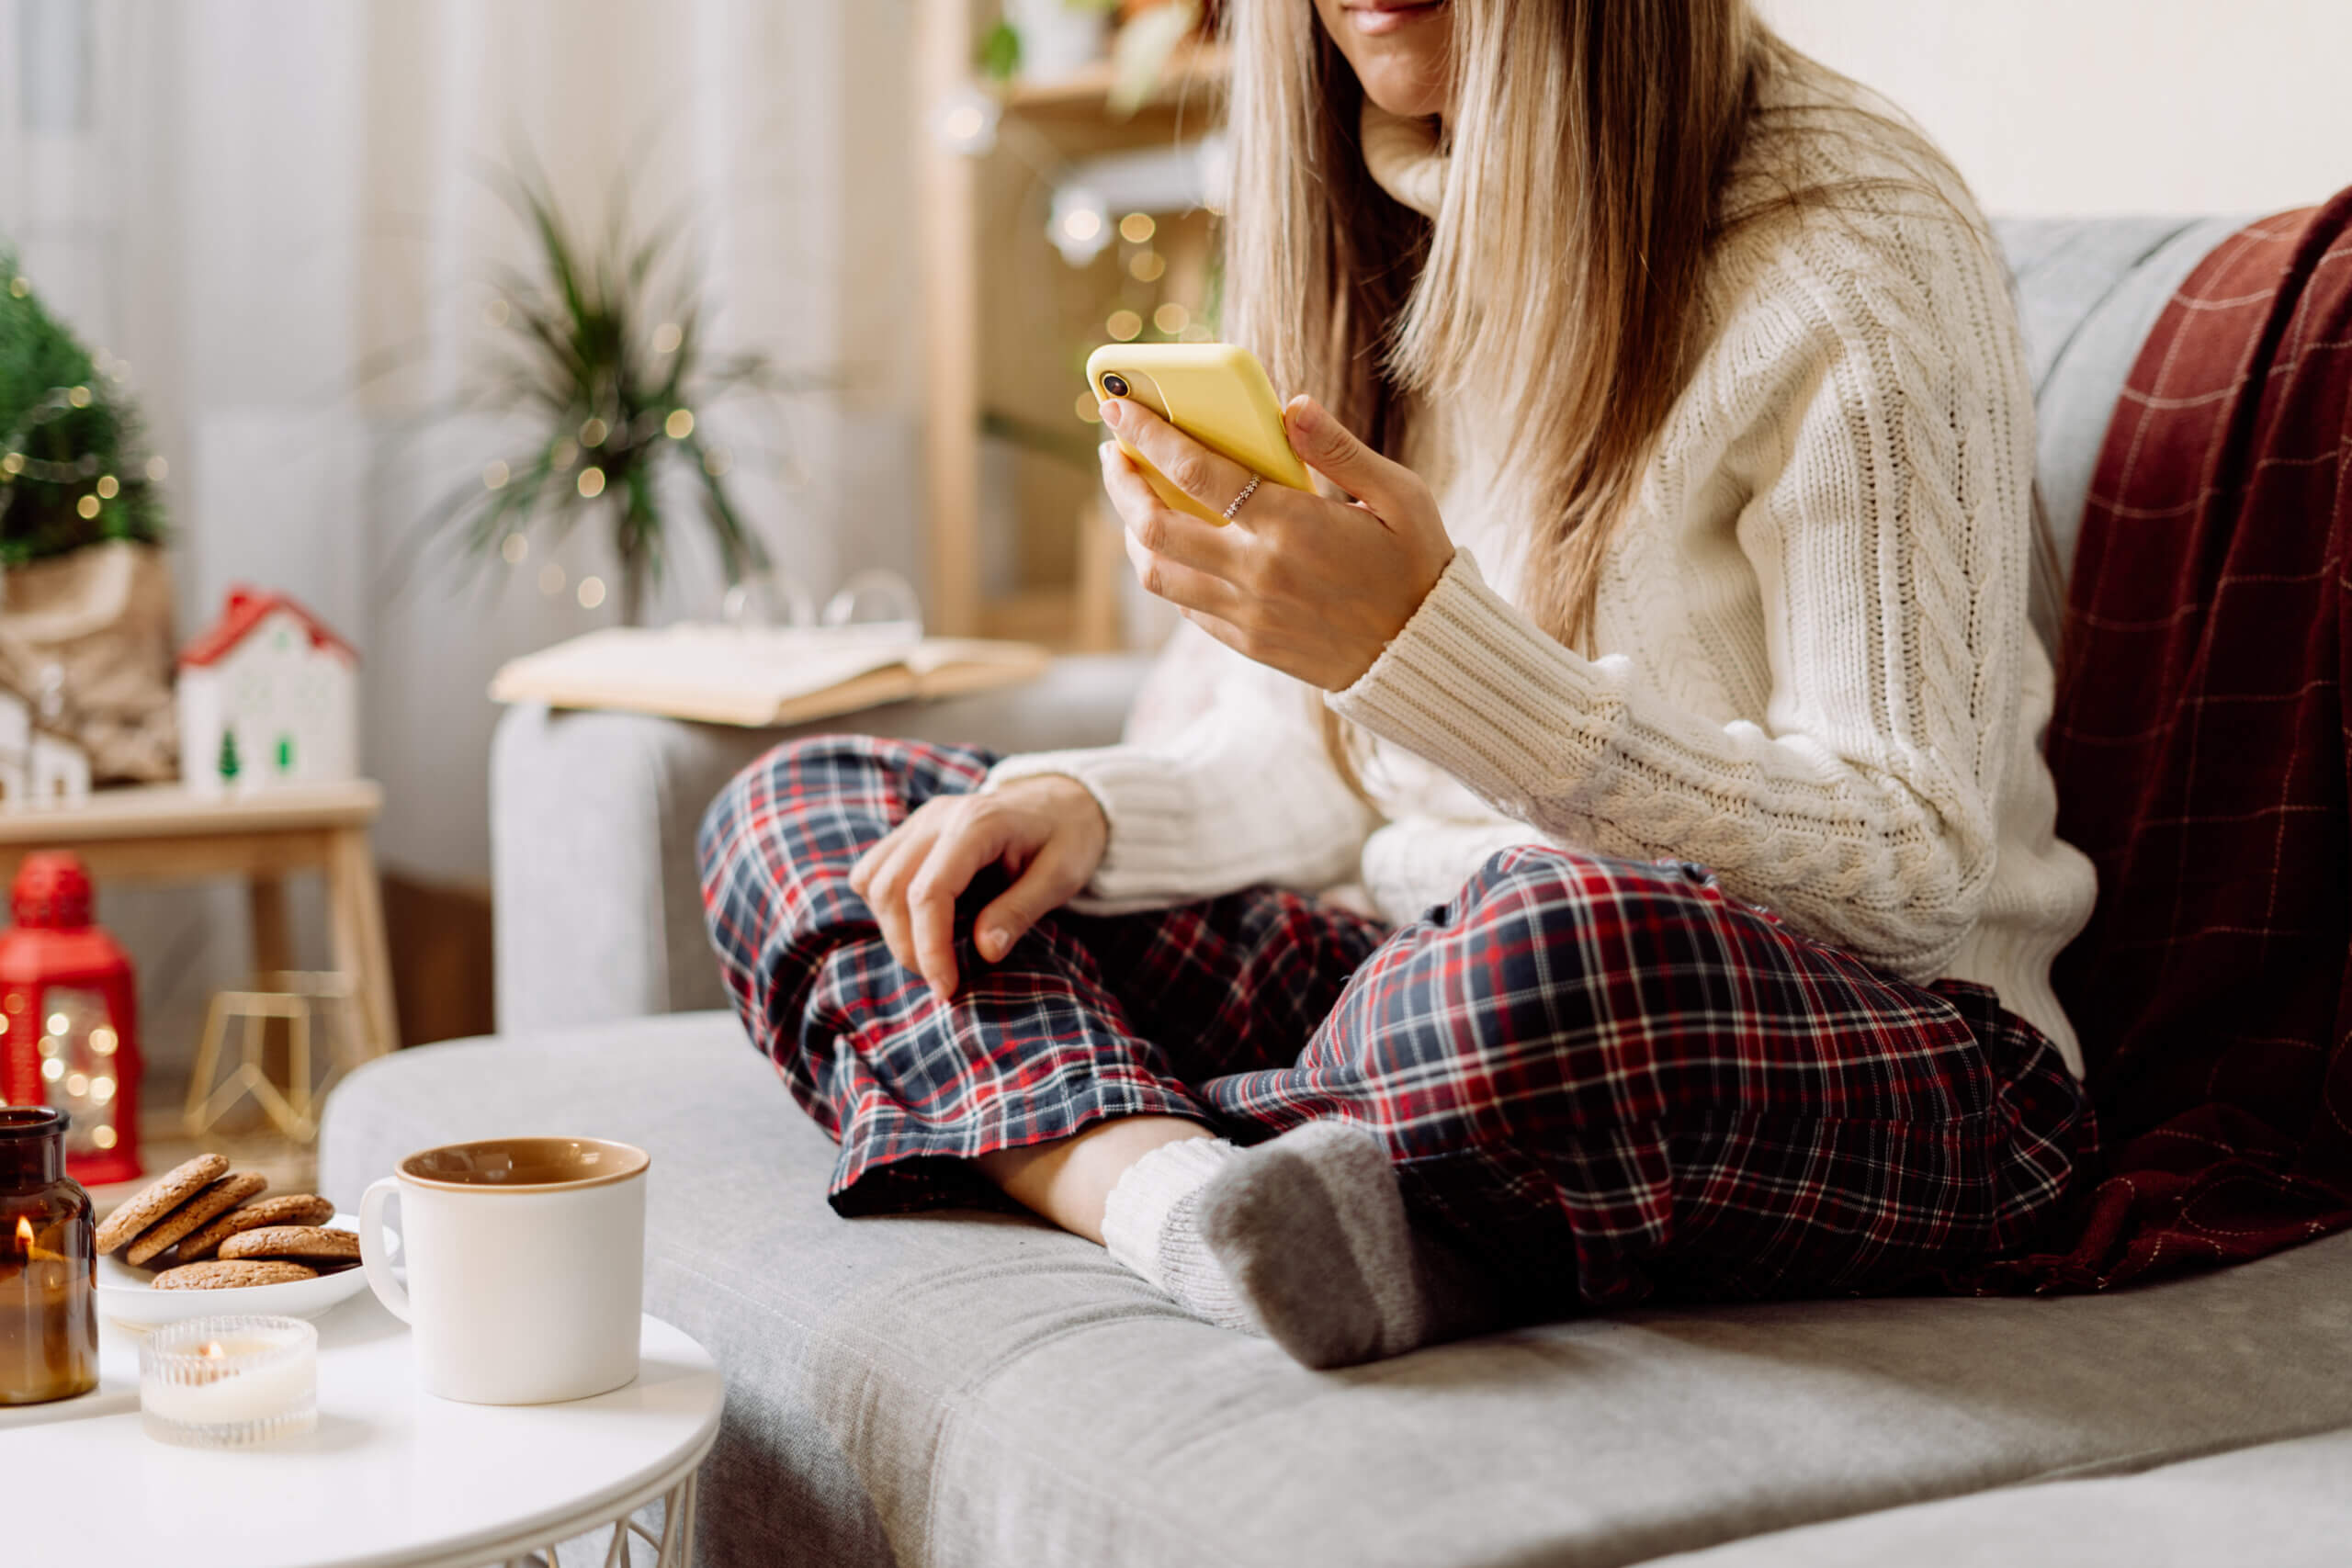 Cozy woman in knitted winter warm socks, sweater and checkered plaid with phone, drinking hot cocoa or coffee in mug resting on couch at home.